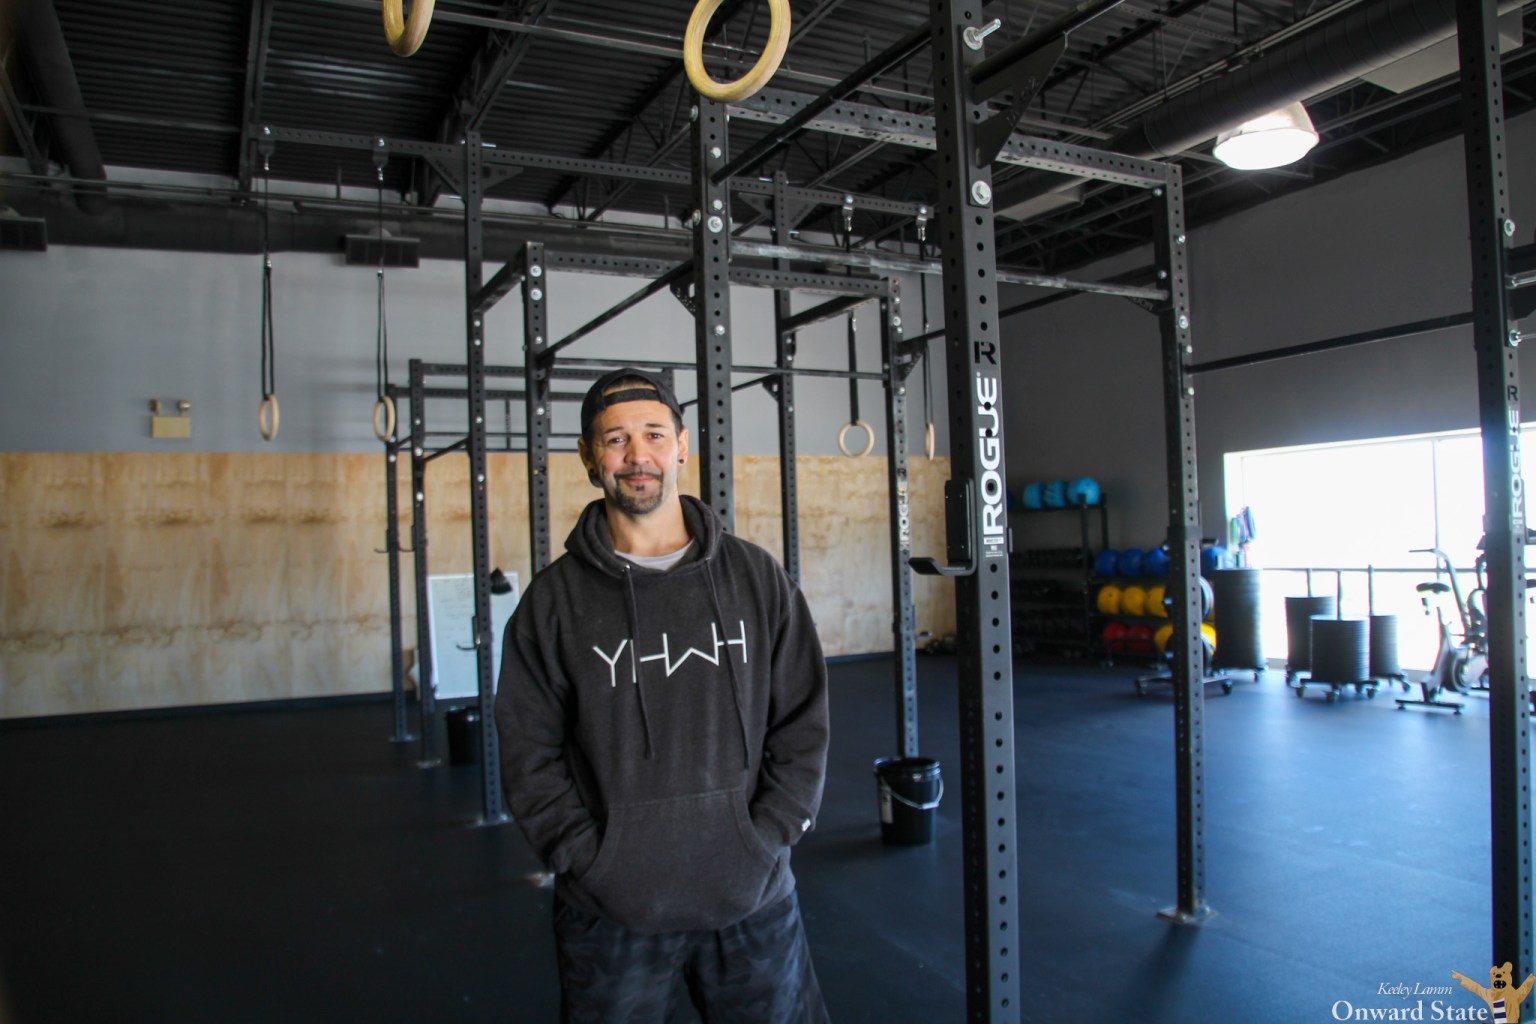 Local Trainer and Pastor Opens CrossFit Gym on Benner Pike